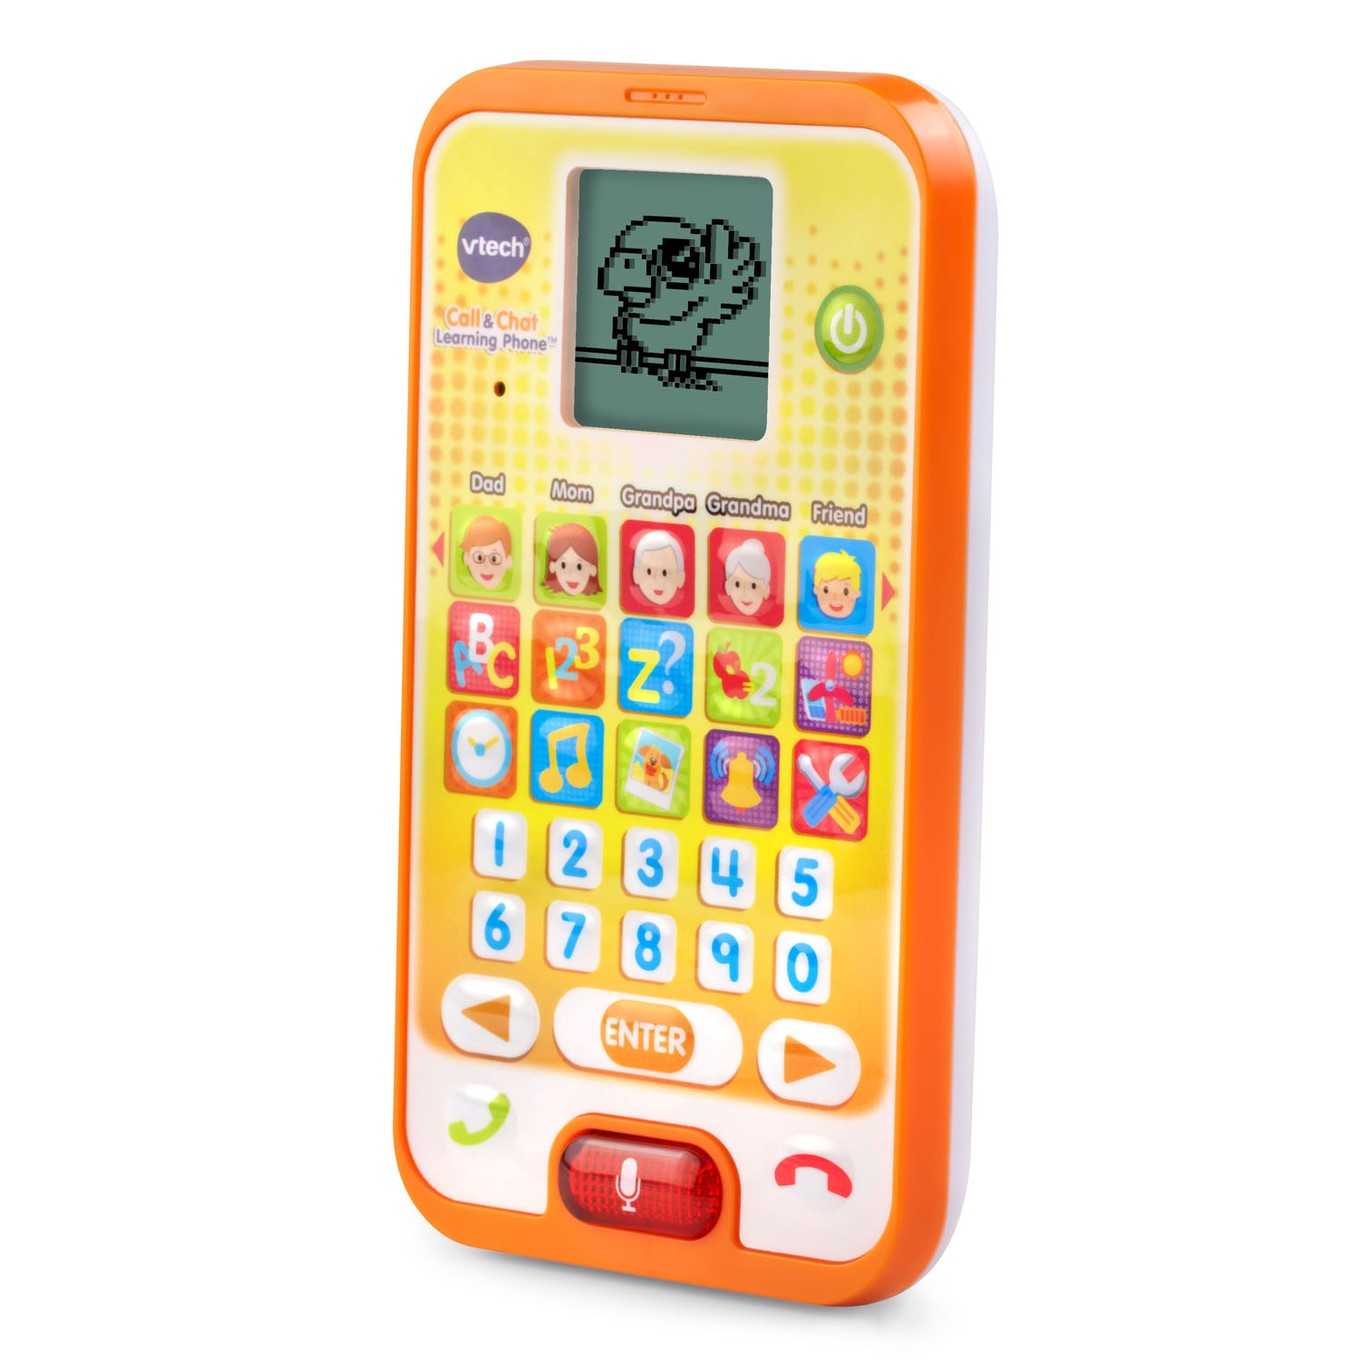 vtech chat and learn phone